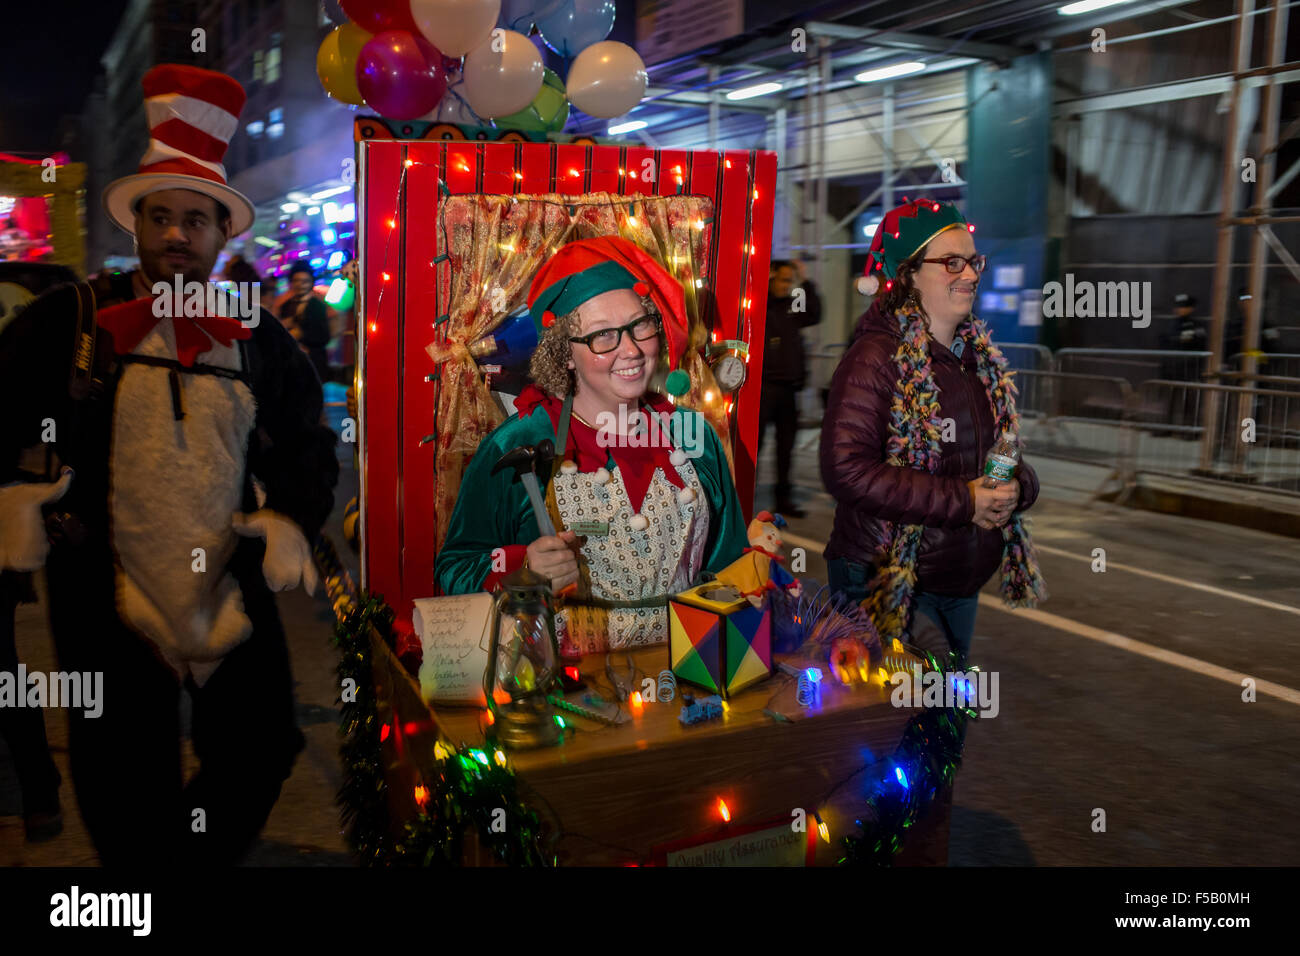 New York, NY - 31 October 2015. A woman dressed as an elf in Santa's workshop, complete with workbench, tools and toys, at the start of the annual Greenwich Village Halloween Parade. Her name tag reads 'Sparkle Twinklebaum.' Stock Photo